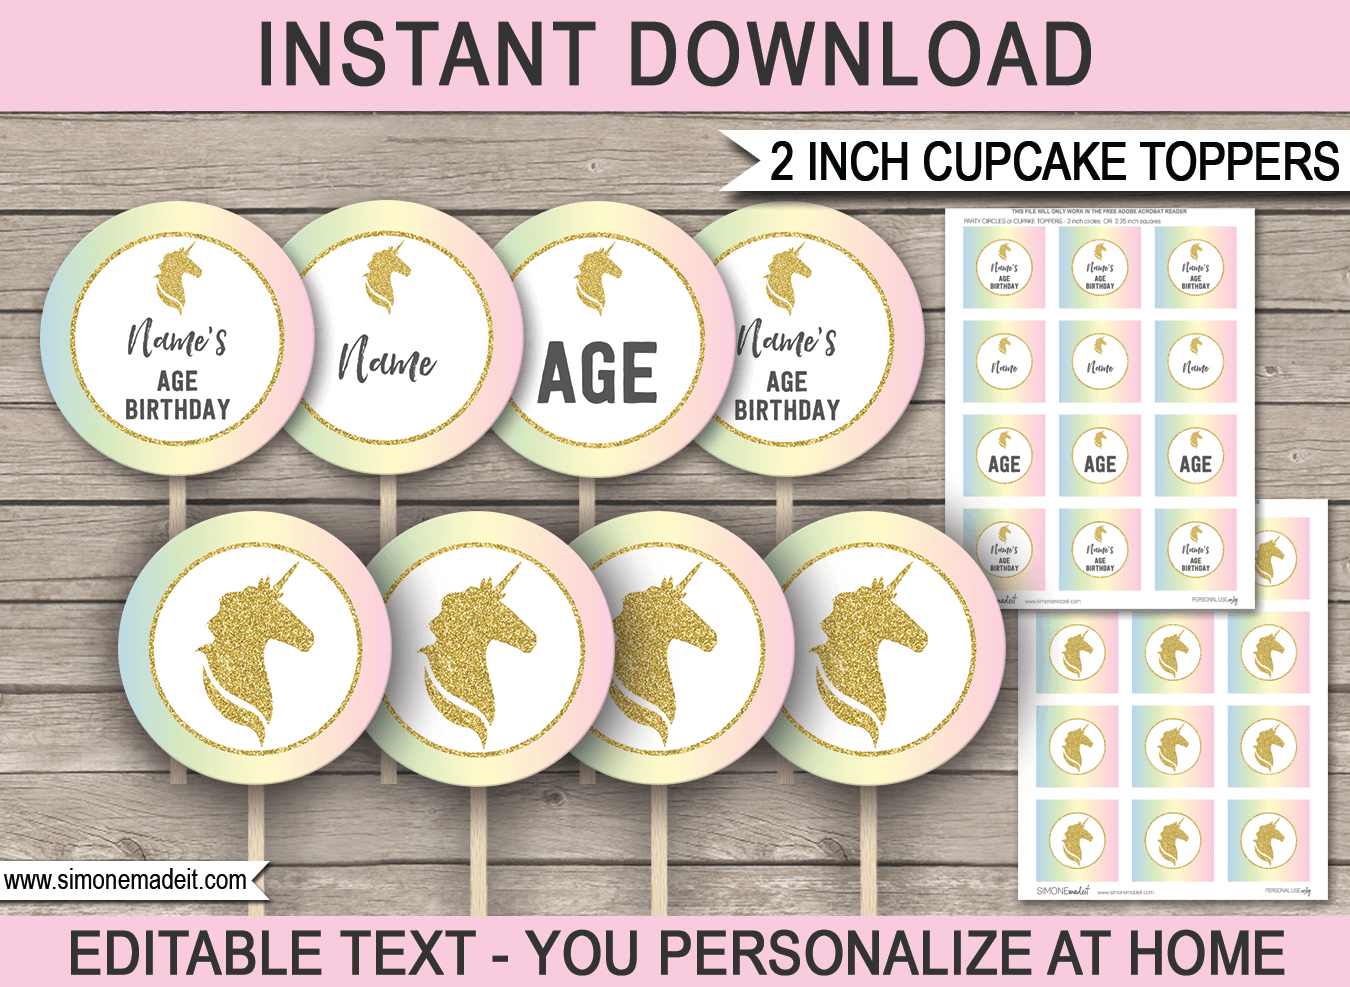 Printable Unicorn Cupcake Toppers Template | 2 inch | Gift Tags | DIY Editable Text | INSTANT DOWNLOAD via simonemadeit.com